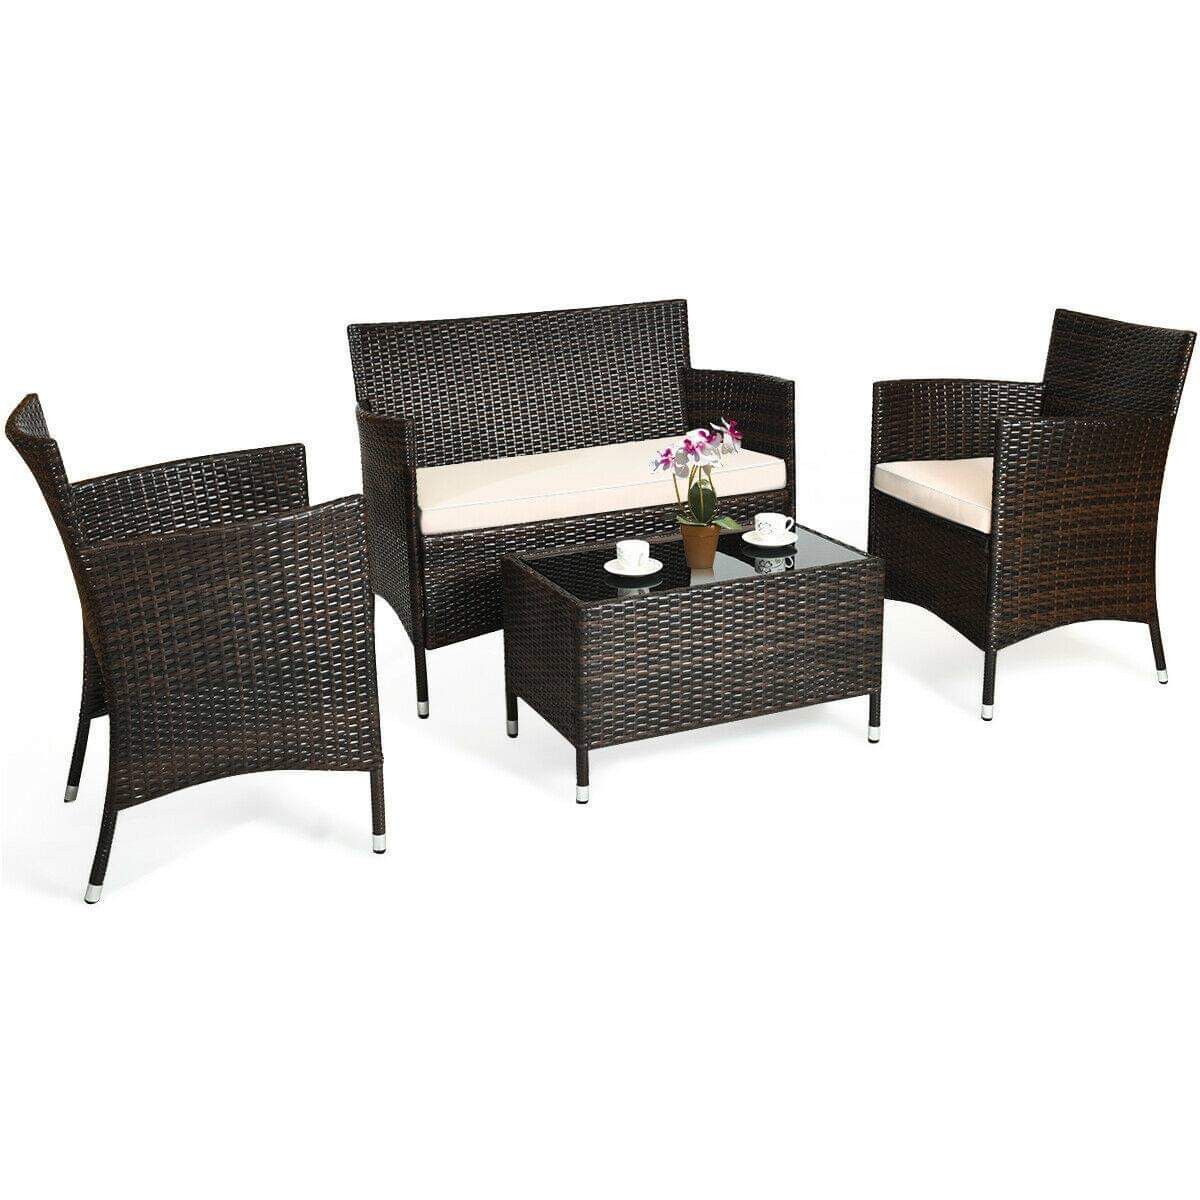 4 pcs outdoor rattan wicker furniture set 2 chairs and 1 coffee table love seat swimming pool side backyard patio porch